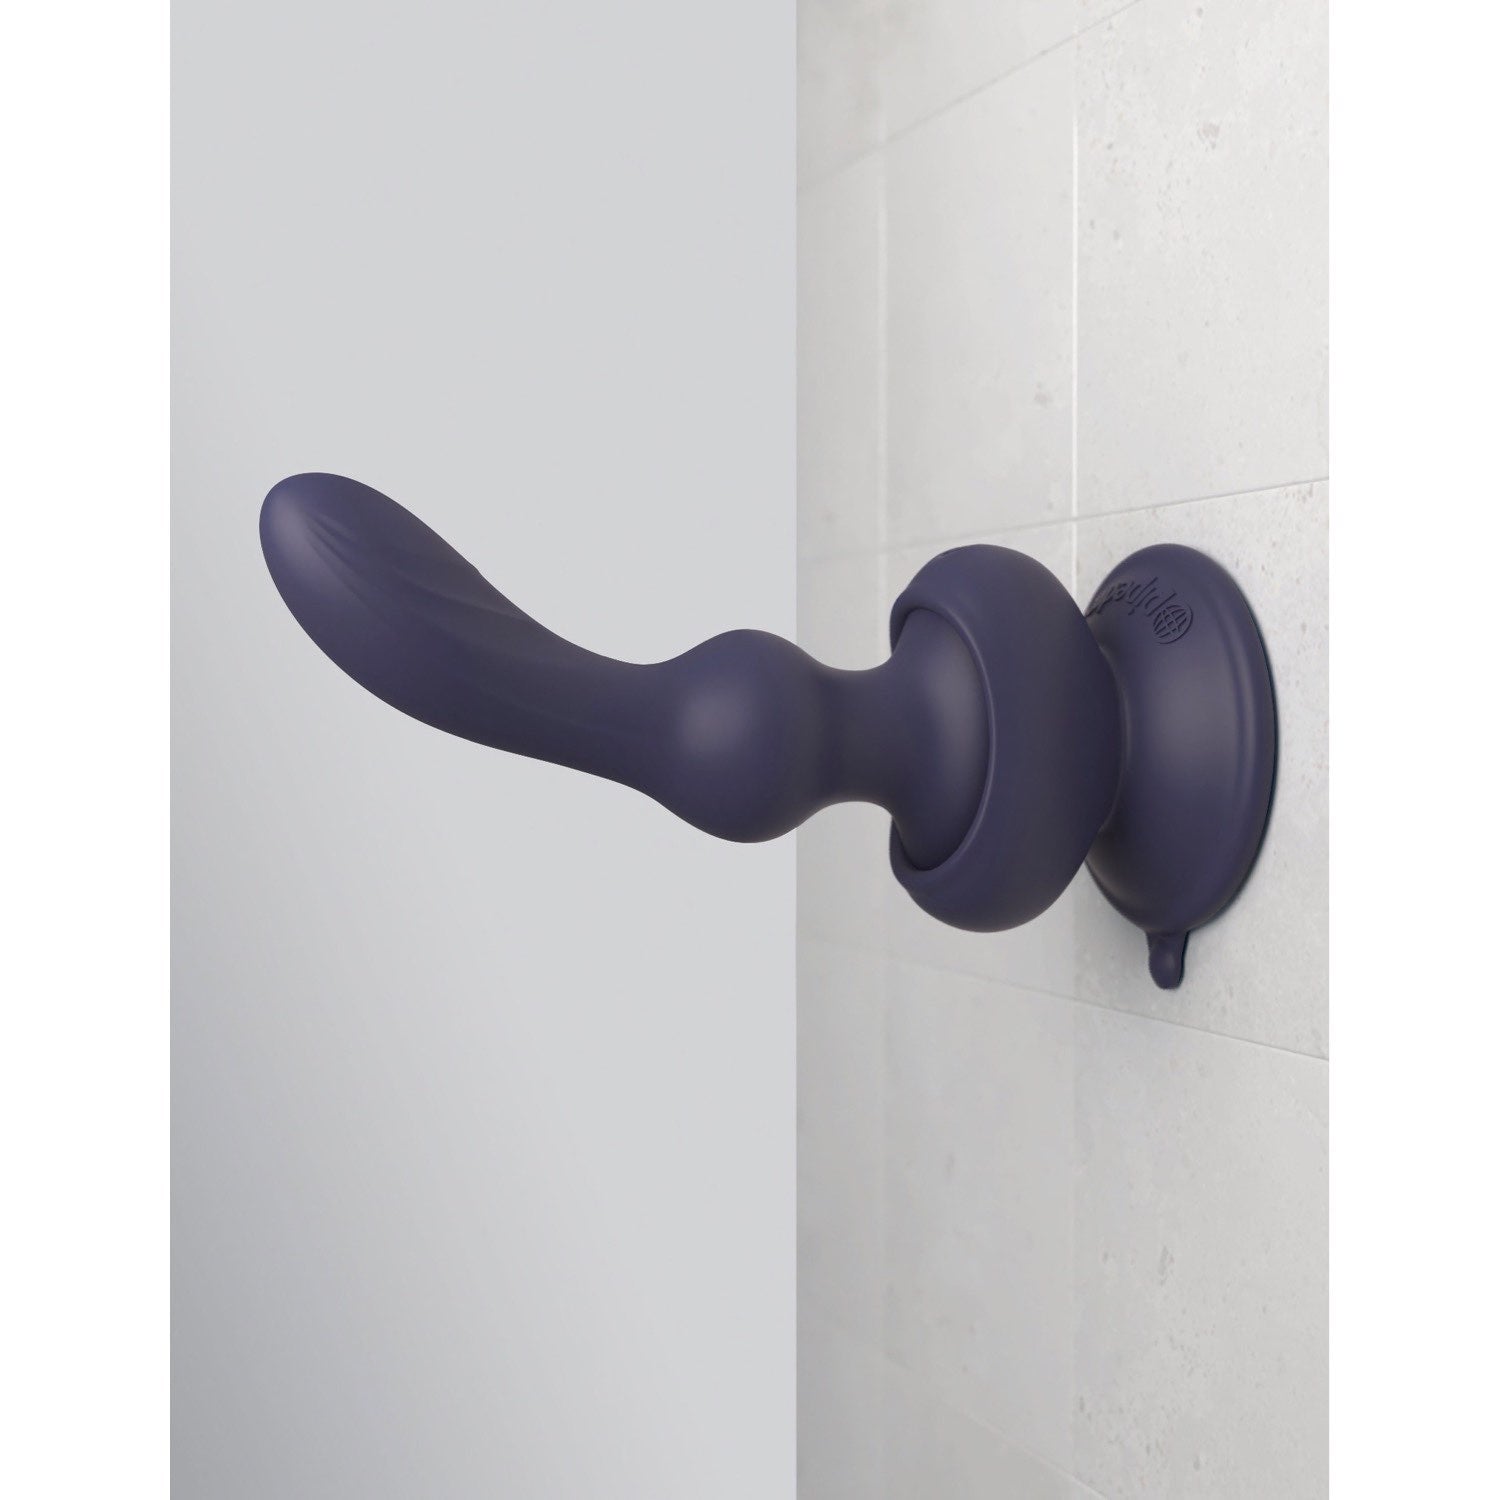 3Some Wall Banger P-Spot - Blue USB Rechargeable Vibrating Prostate Massager with Remote by Pipedream